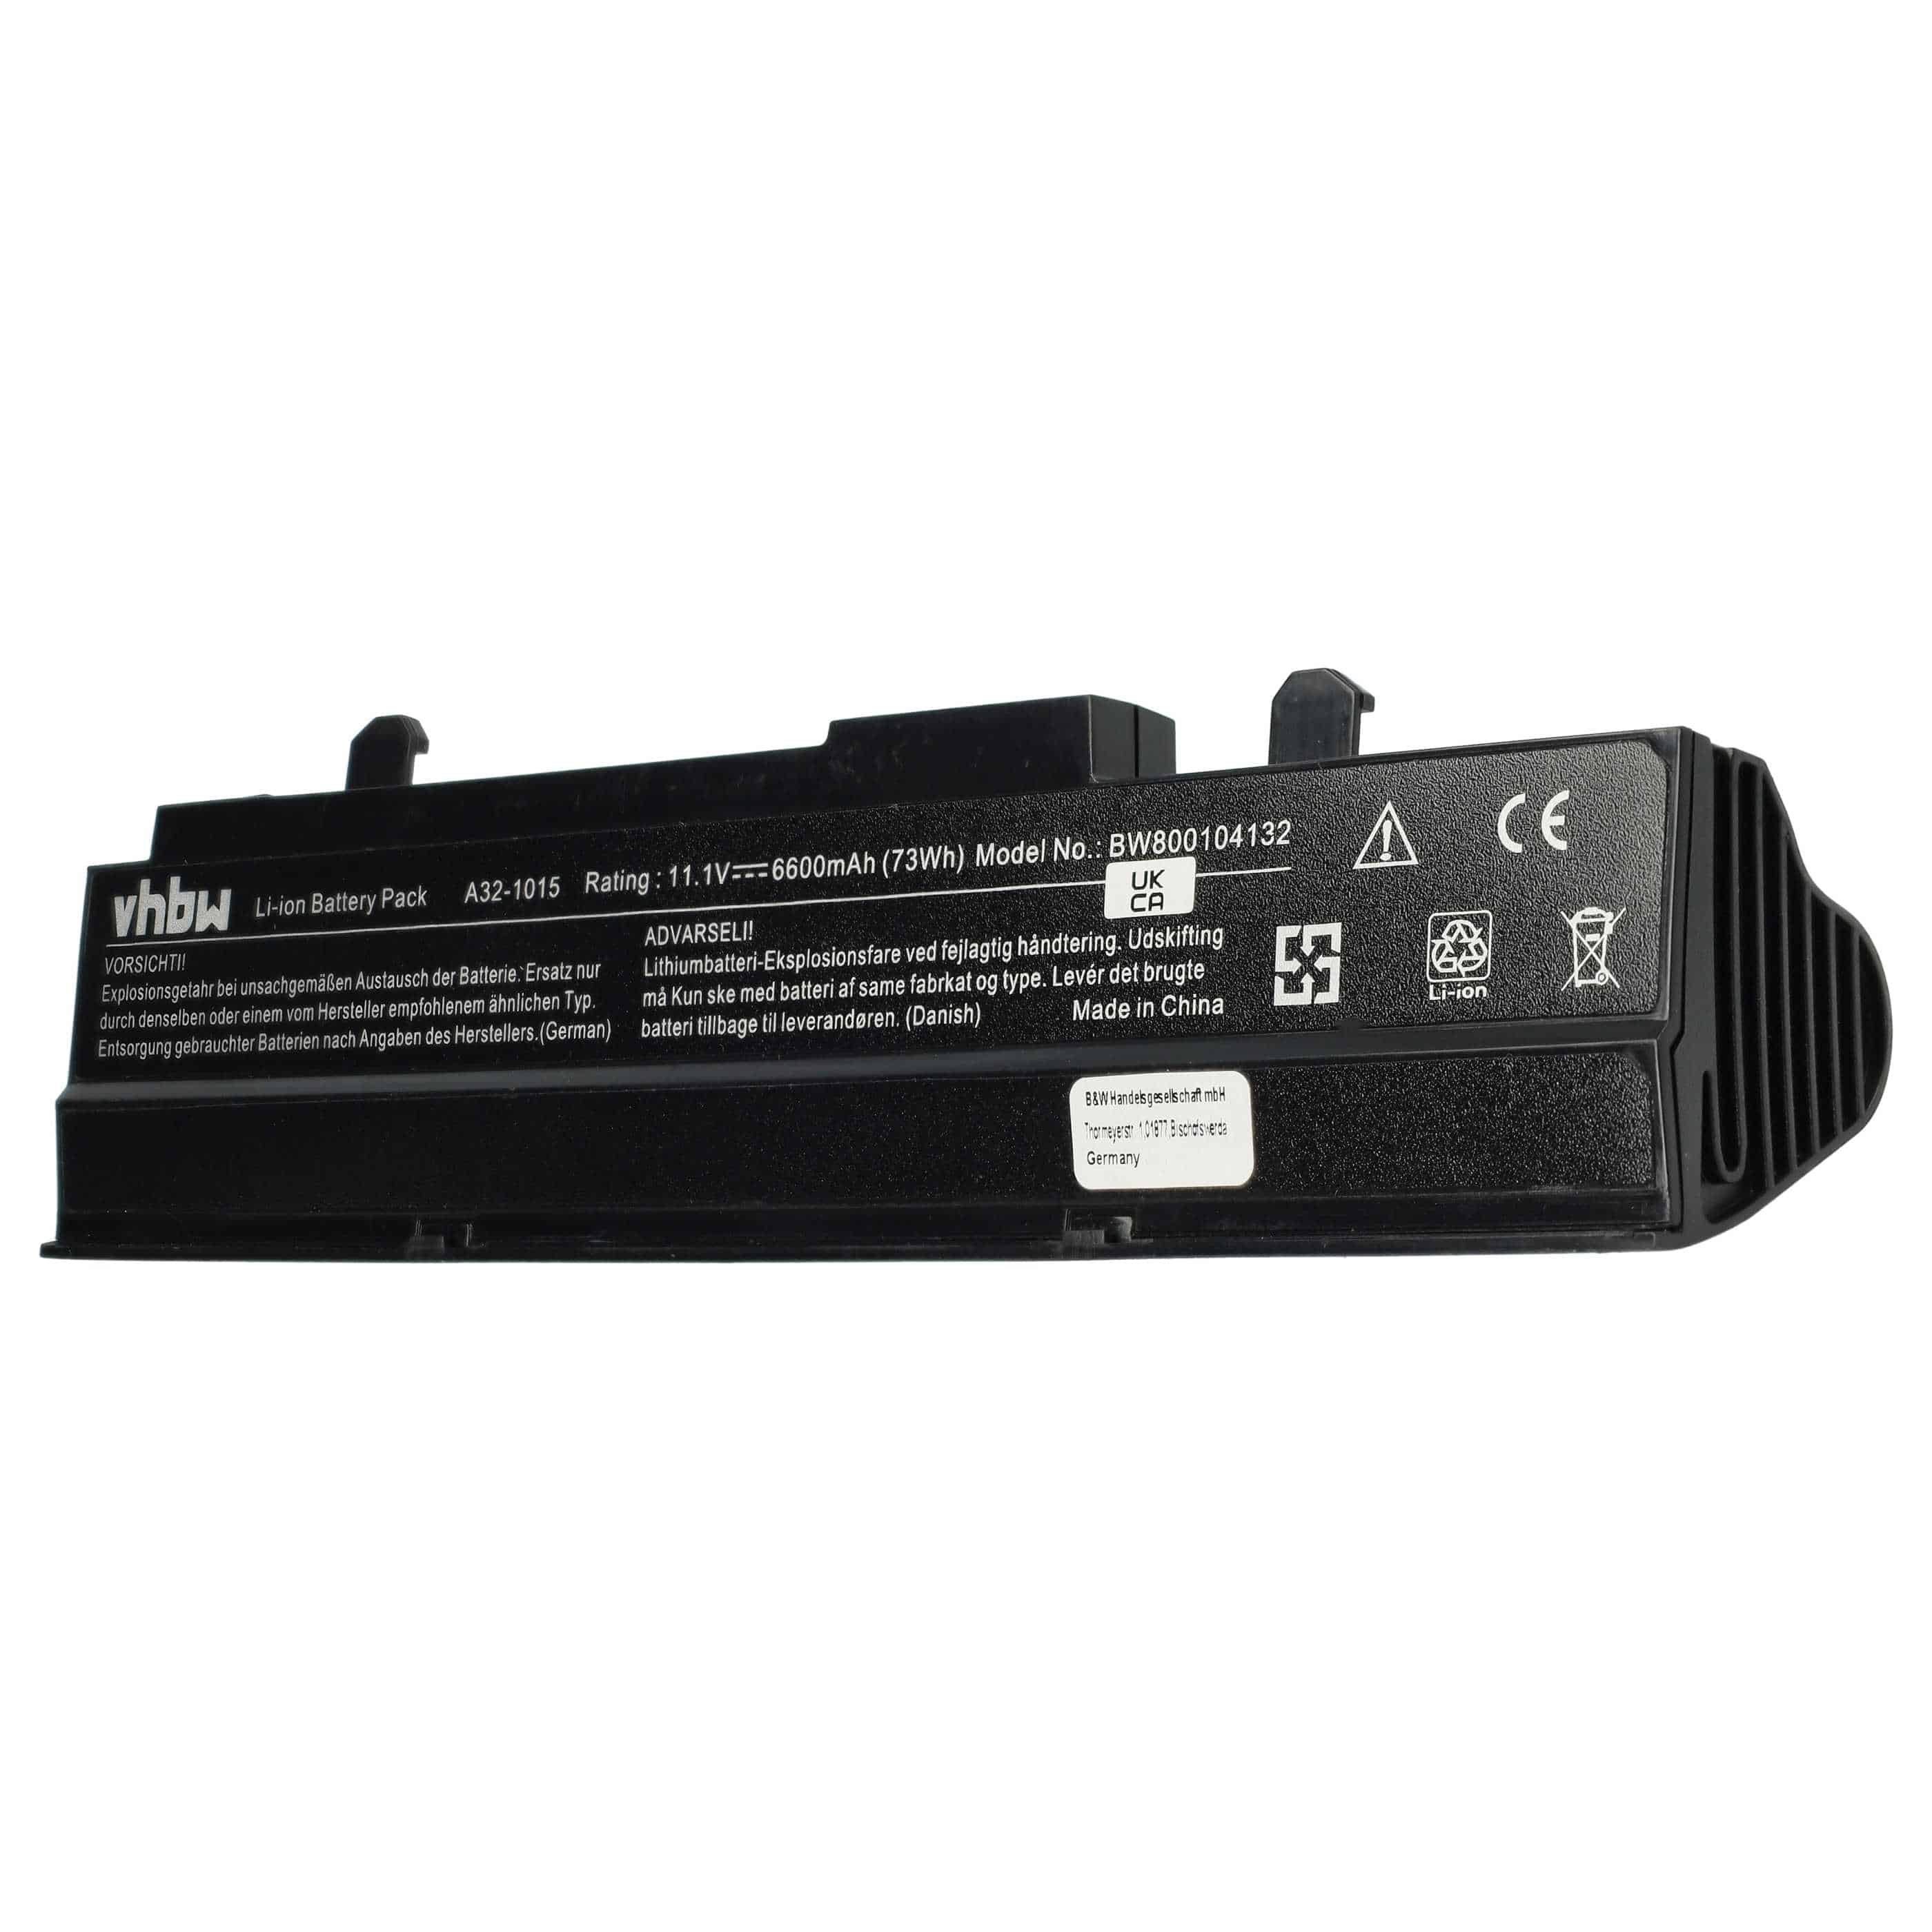 Notebook Battery Replacement for Asus A31-1015, A32-1015, AL31-1015, PL32-1015 - 2200mAh 10.8V Li-Ion, black